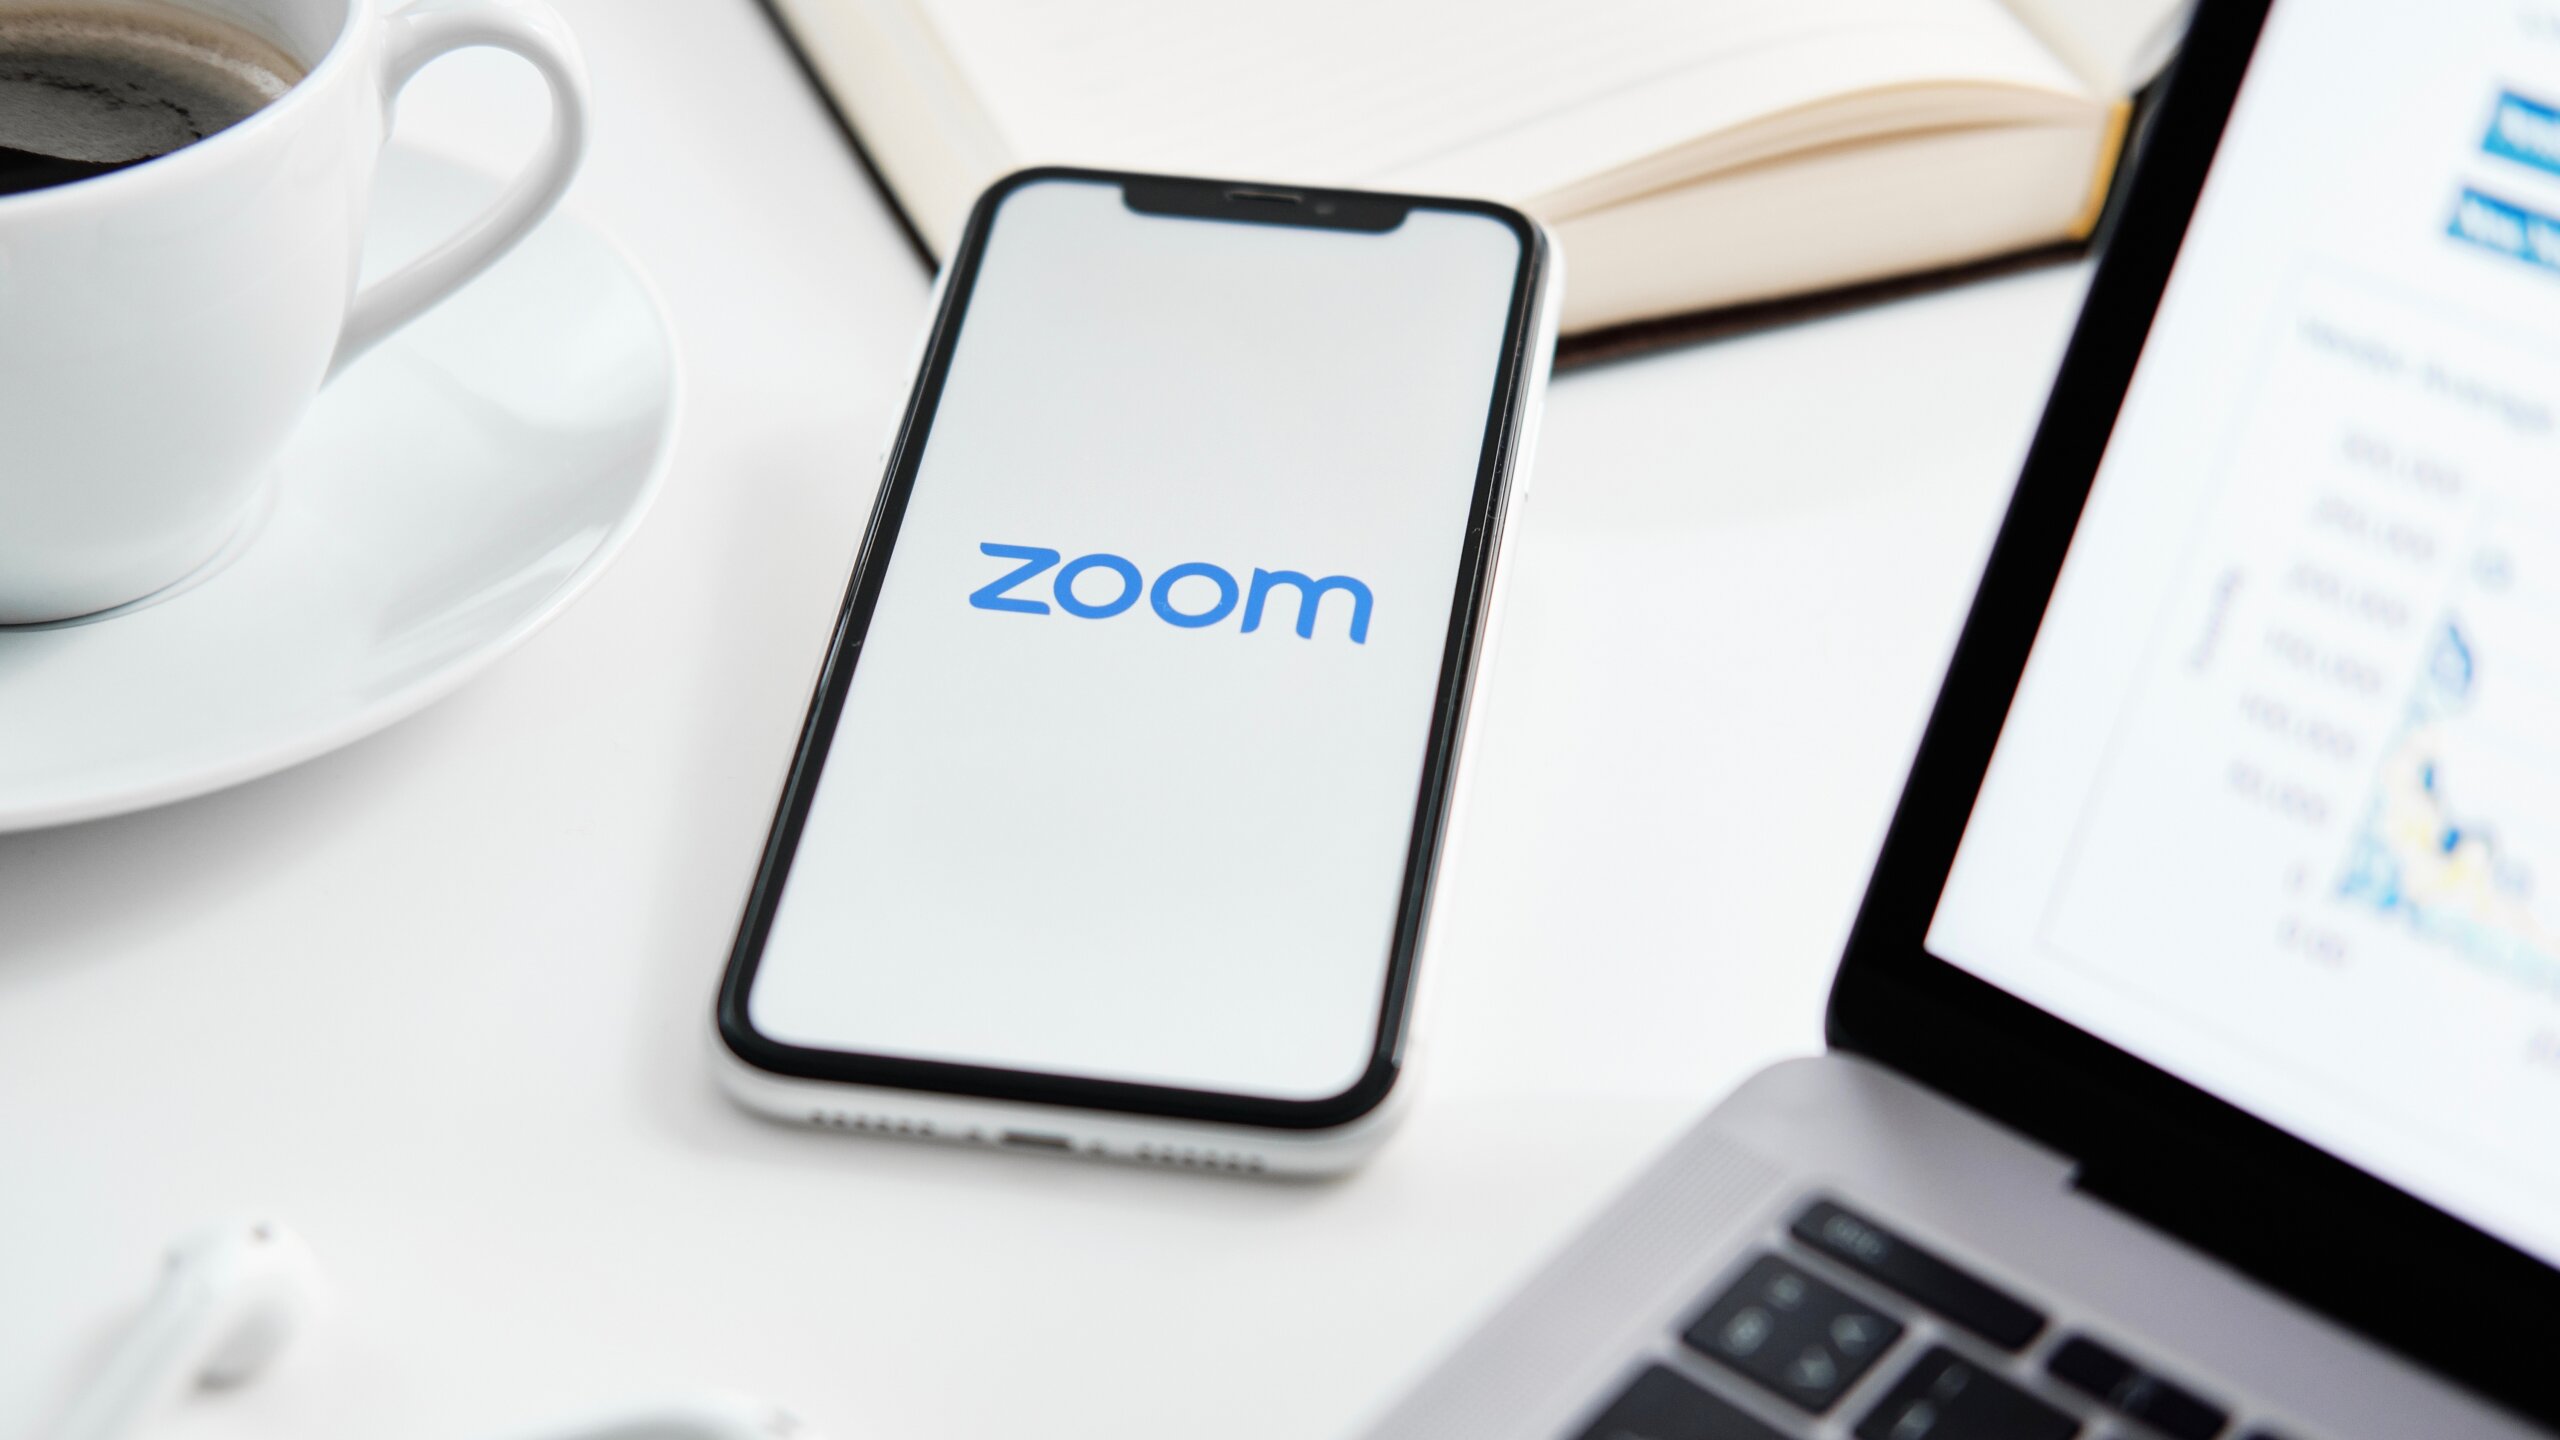 Zoom’s mega takeover deal of Five9 going by federal examination